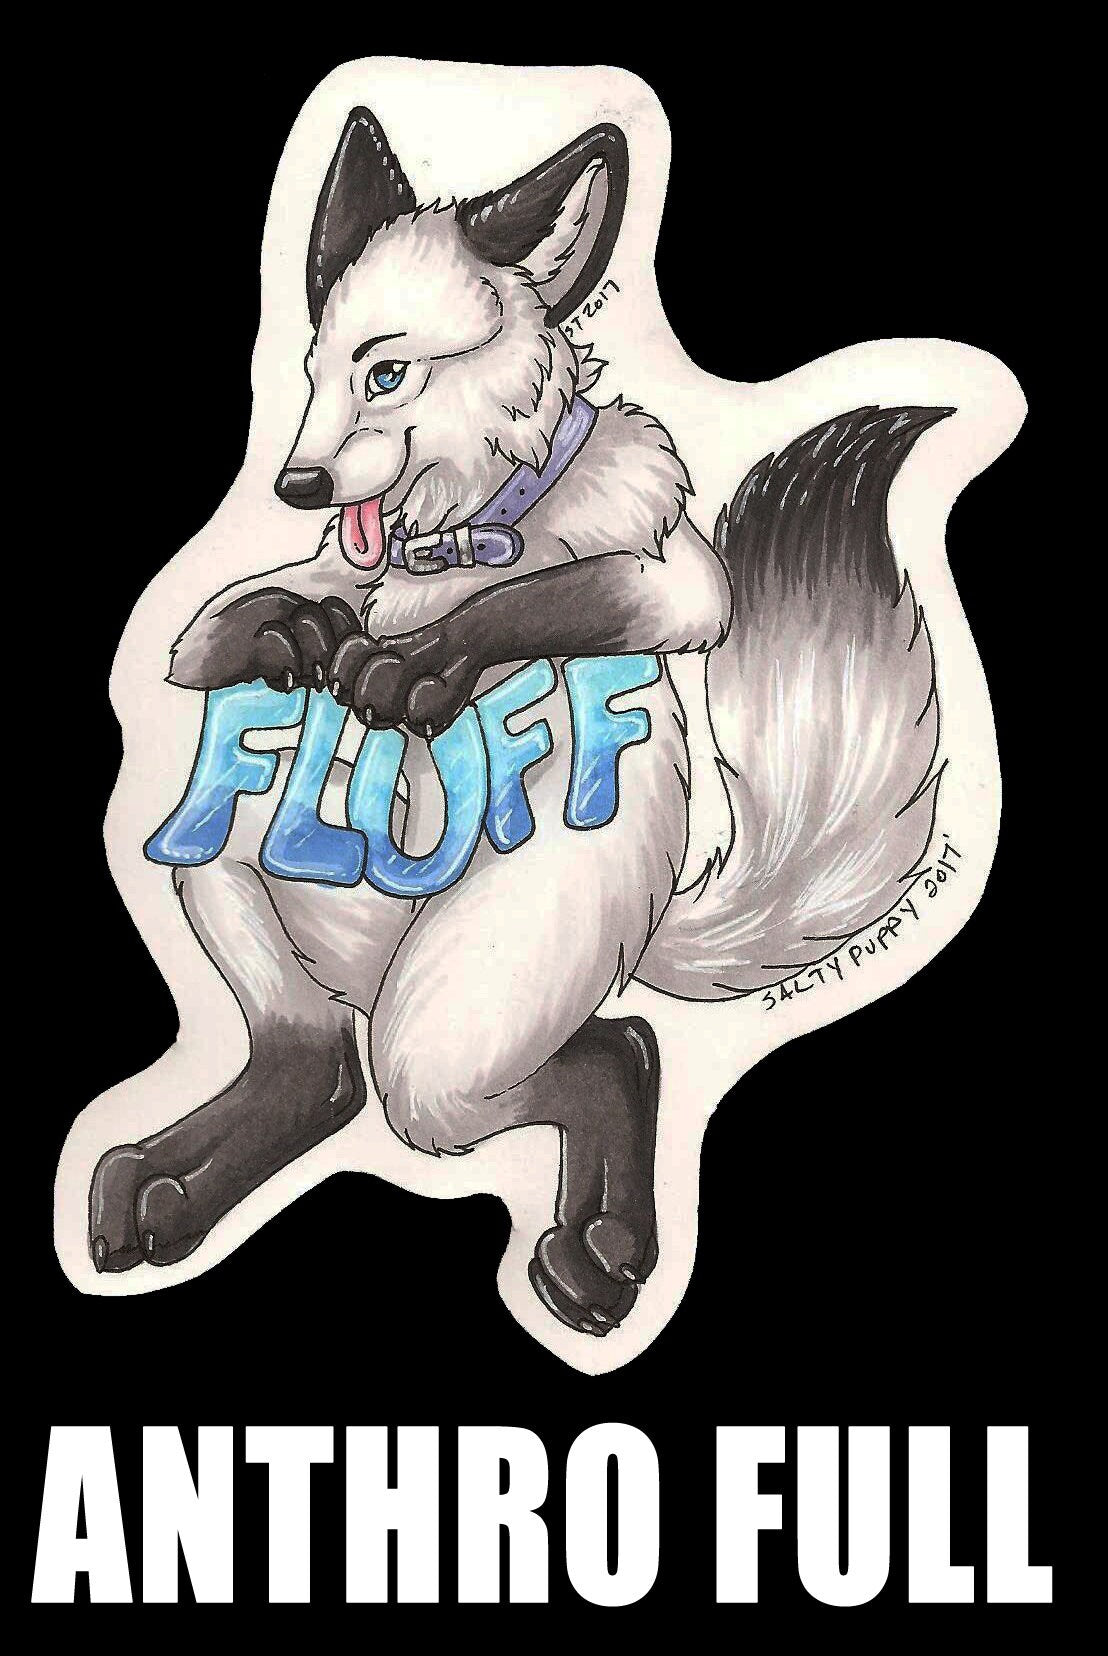 Custom Fursuit Character Badge or Artwork! Laminated and ready to wear!